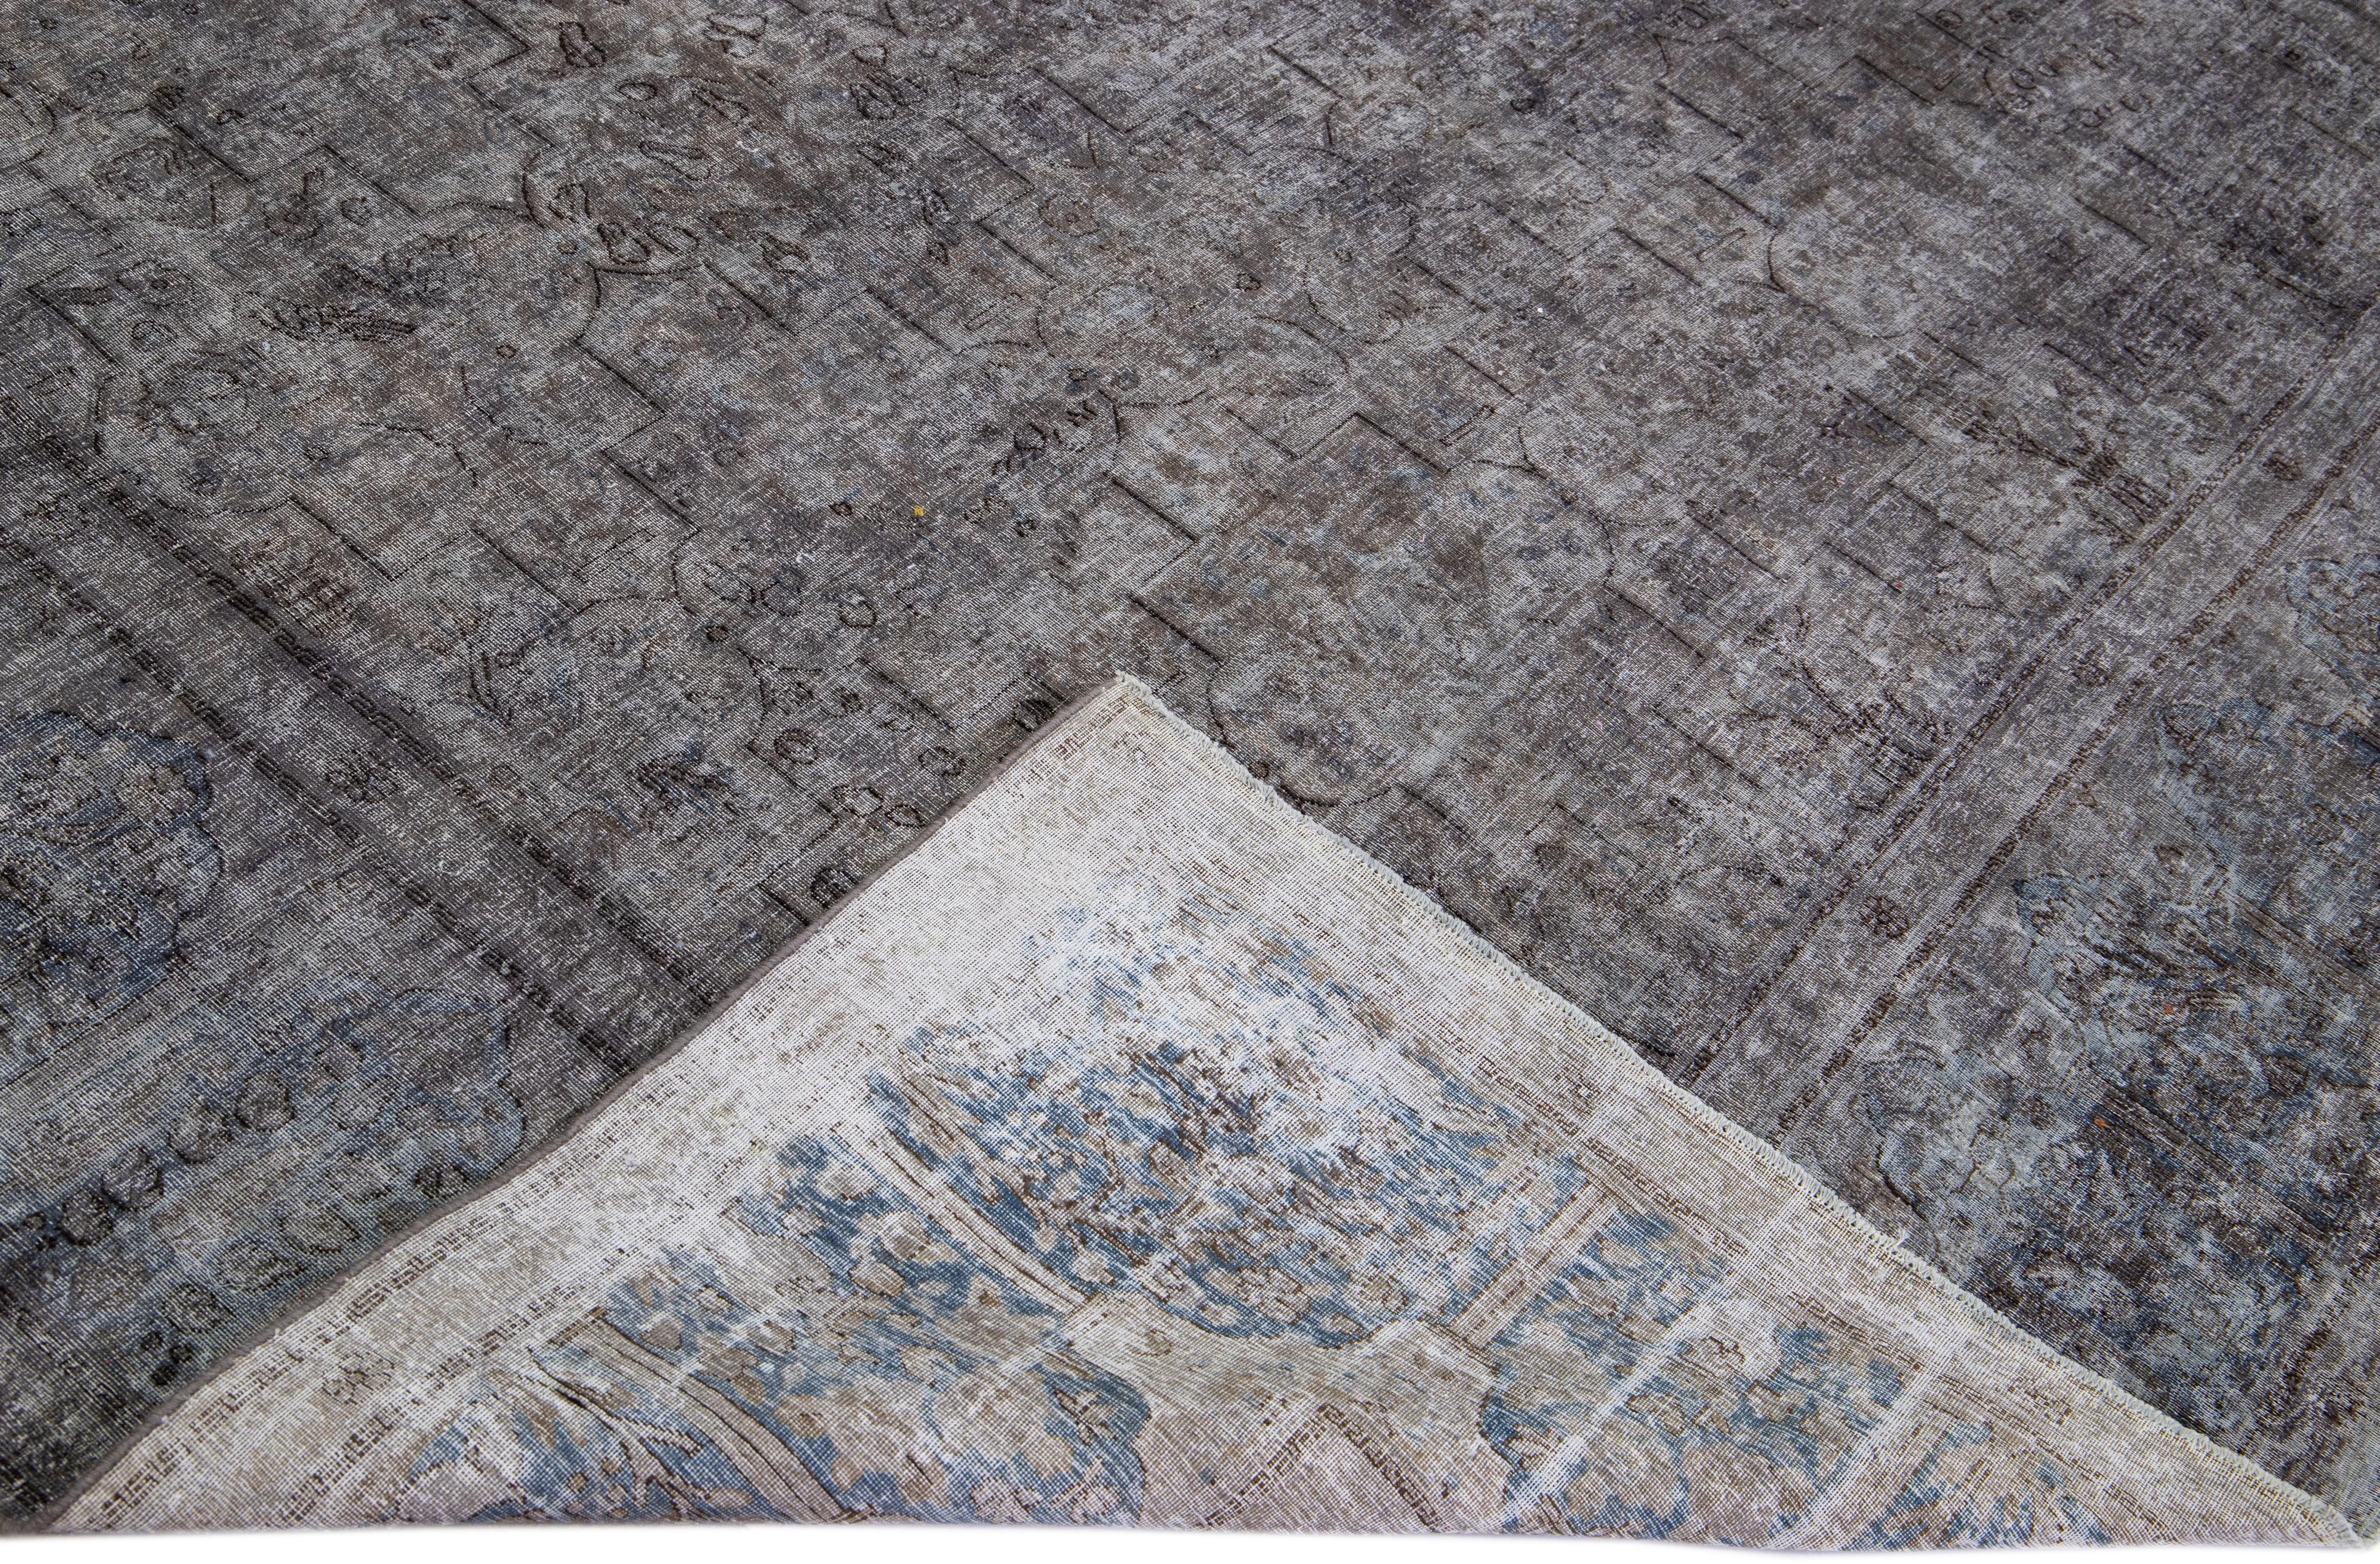 Beautiful Vintage Overdyed hand-knotted wool rug with a gray field. This Persian rug has blue and black accents in an all-over geometric design.

This rug measures: 9'7